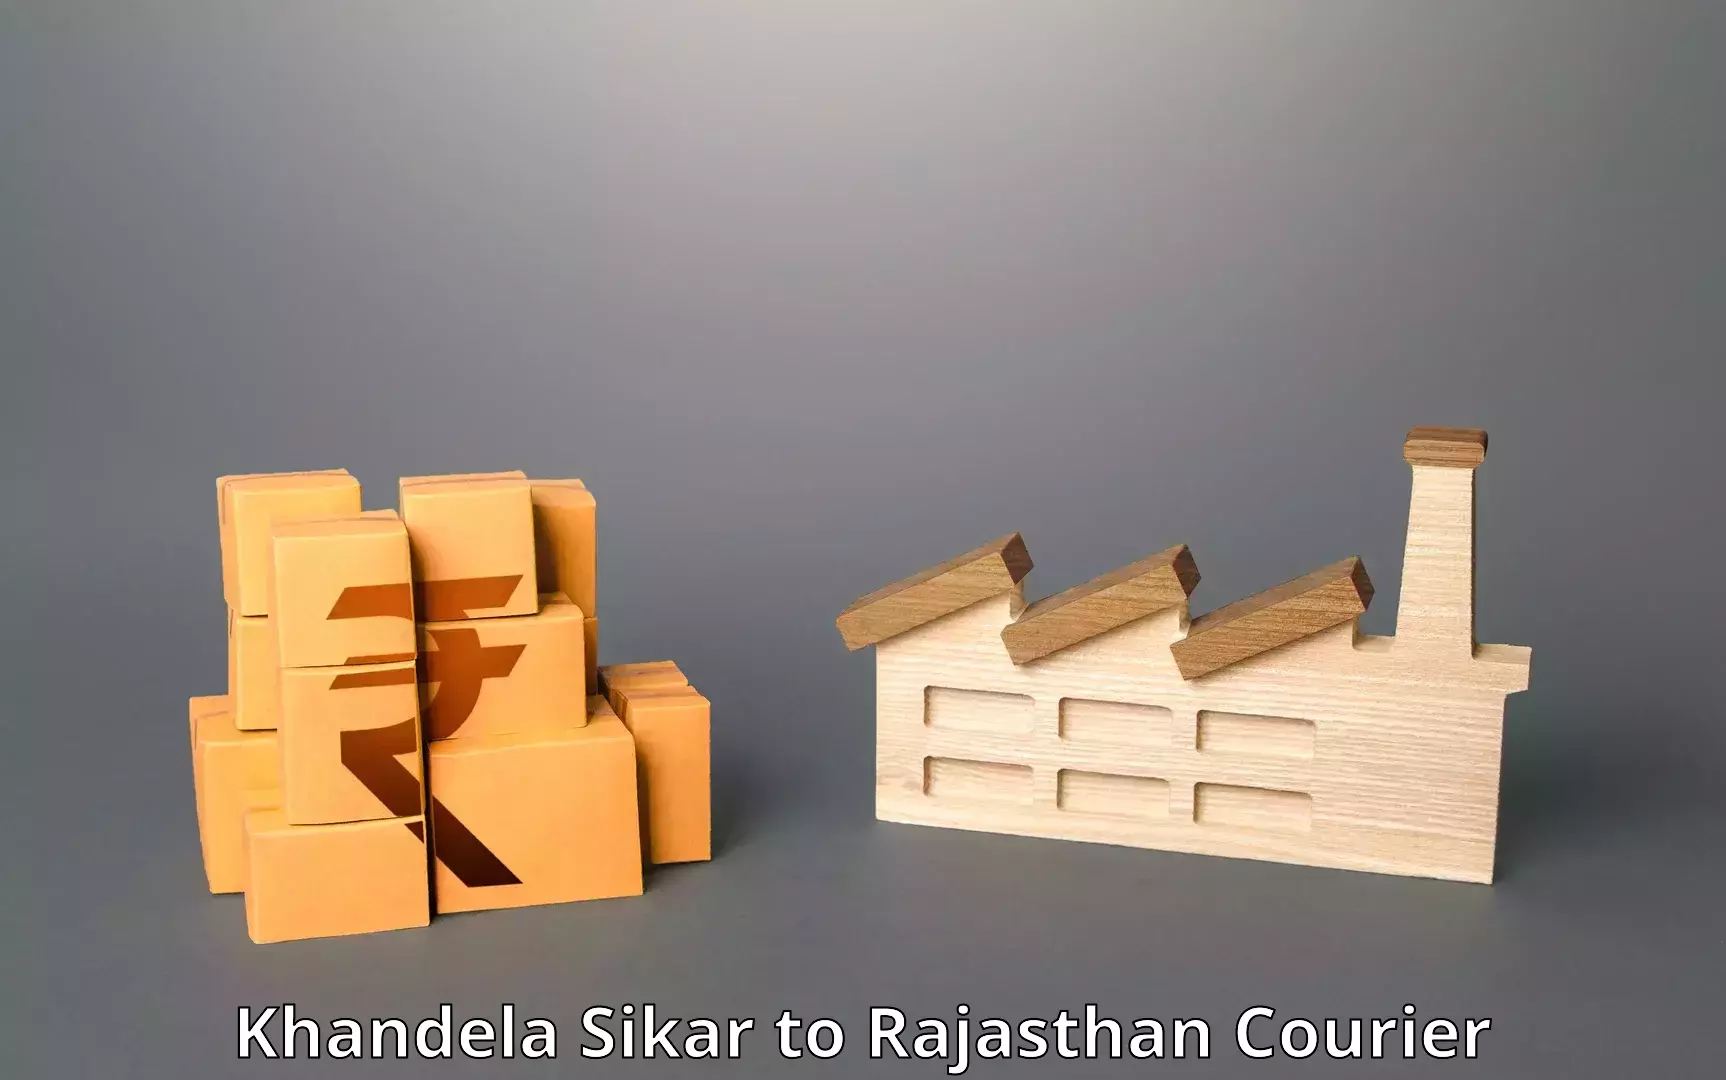 Cost-effective freight solutions Khandela Sikar to Rajasthan